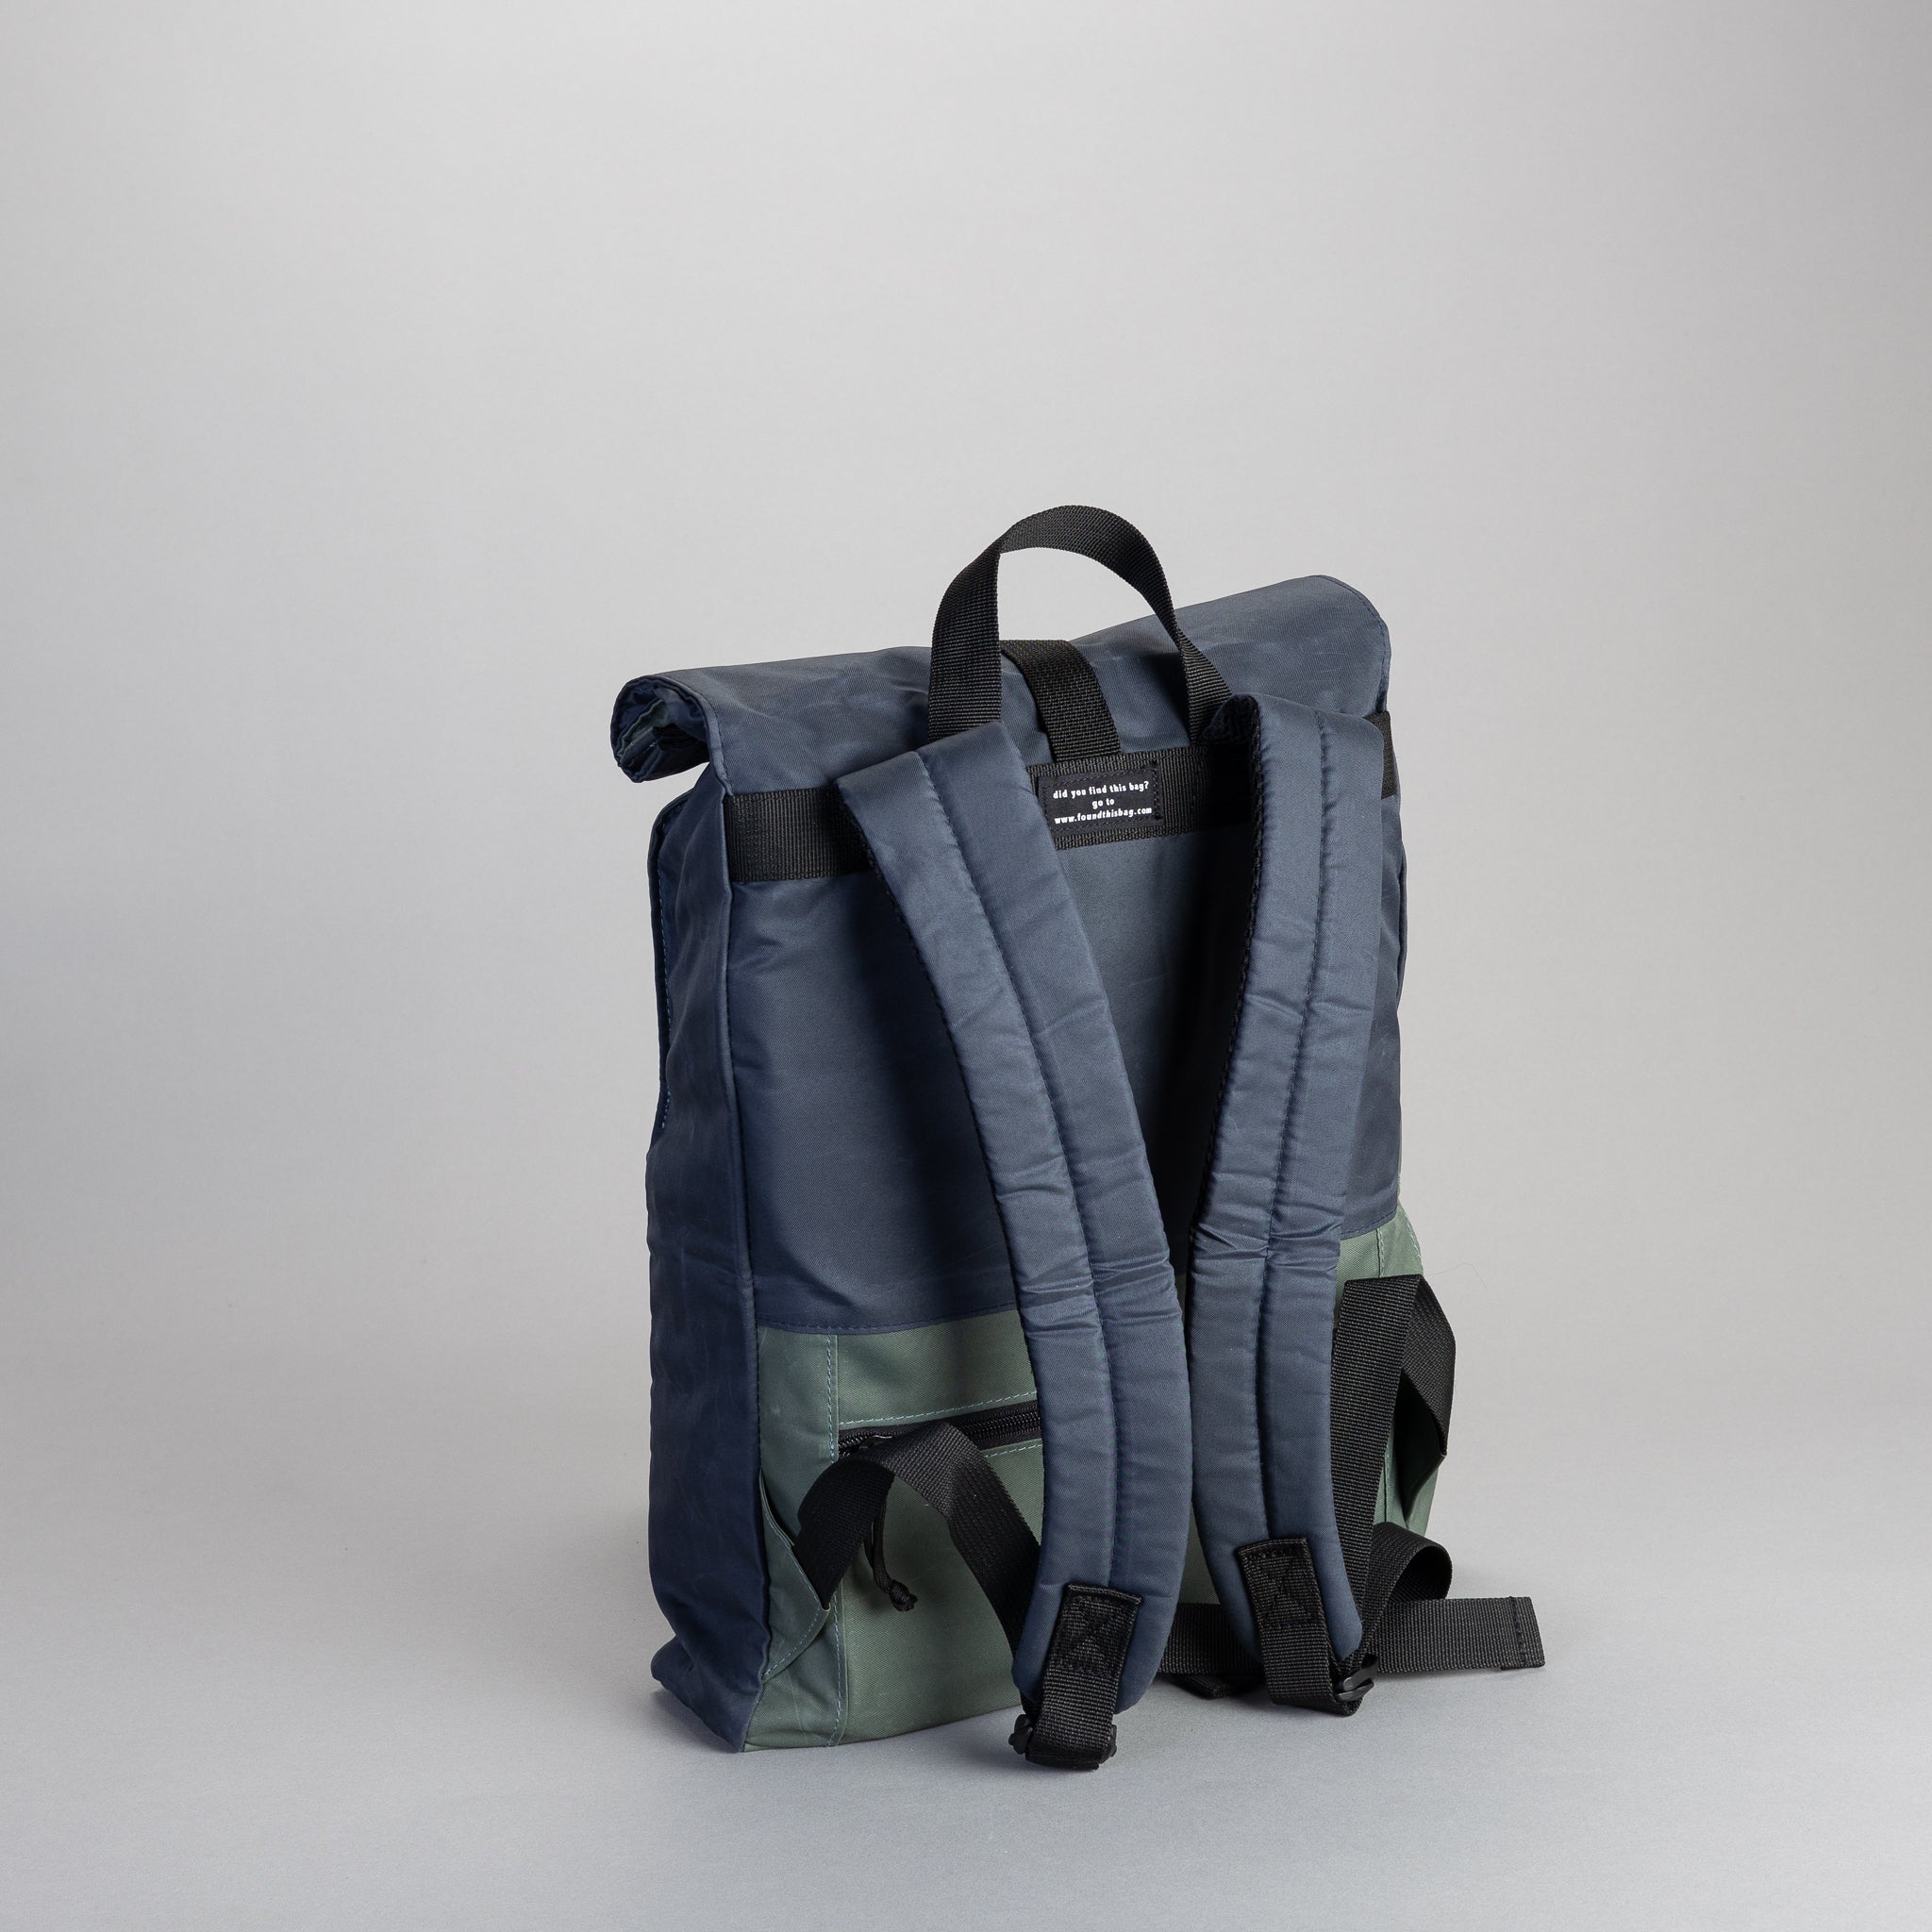 Bobby Small Foldable Backpack